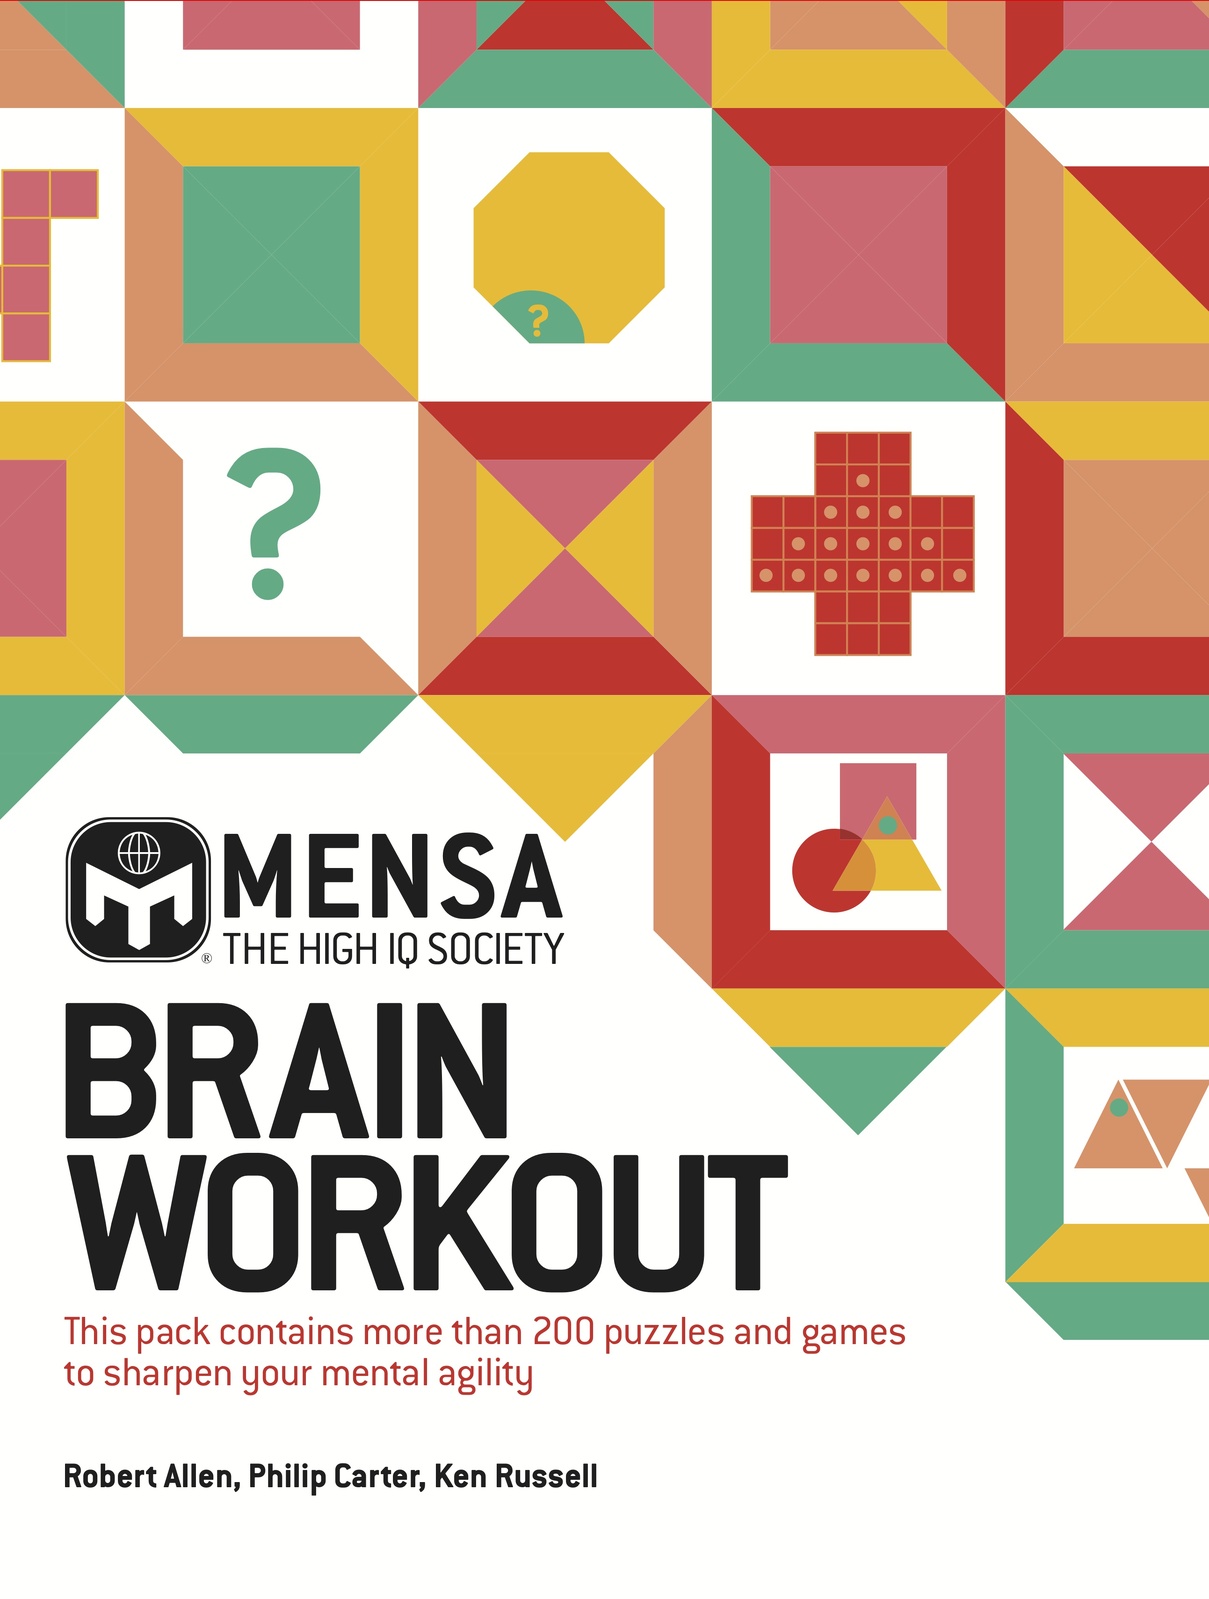 Mensa Brain Workout Pack: Improve your memory